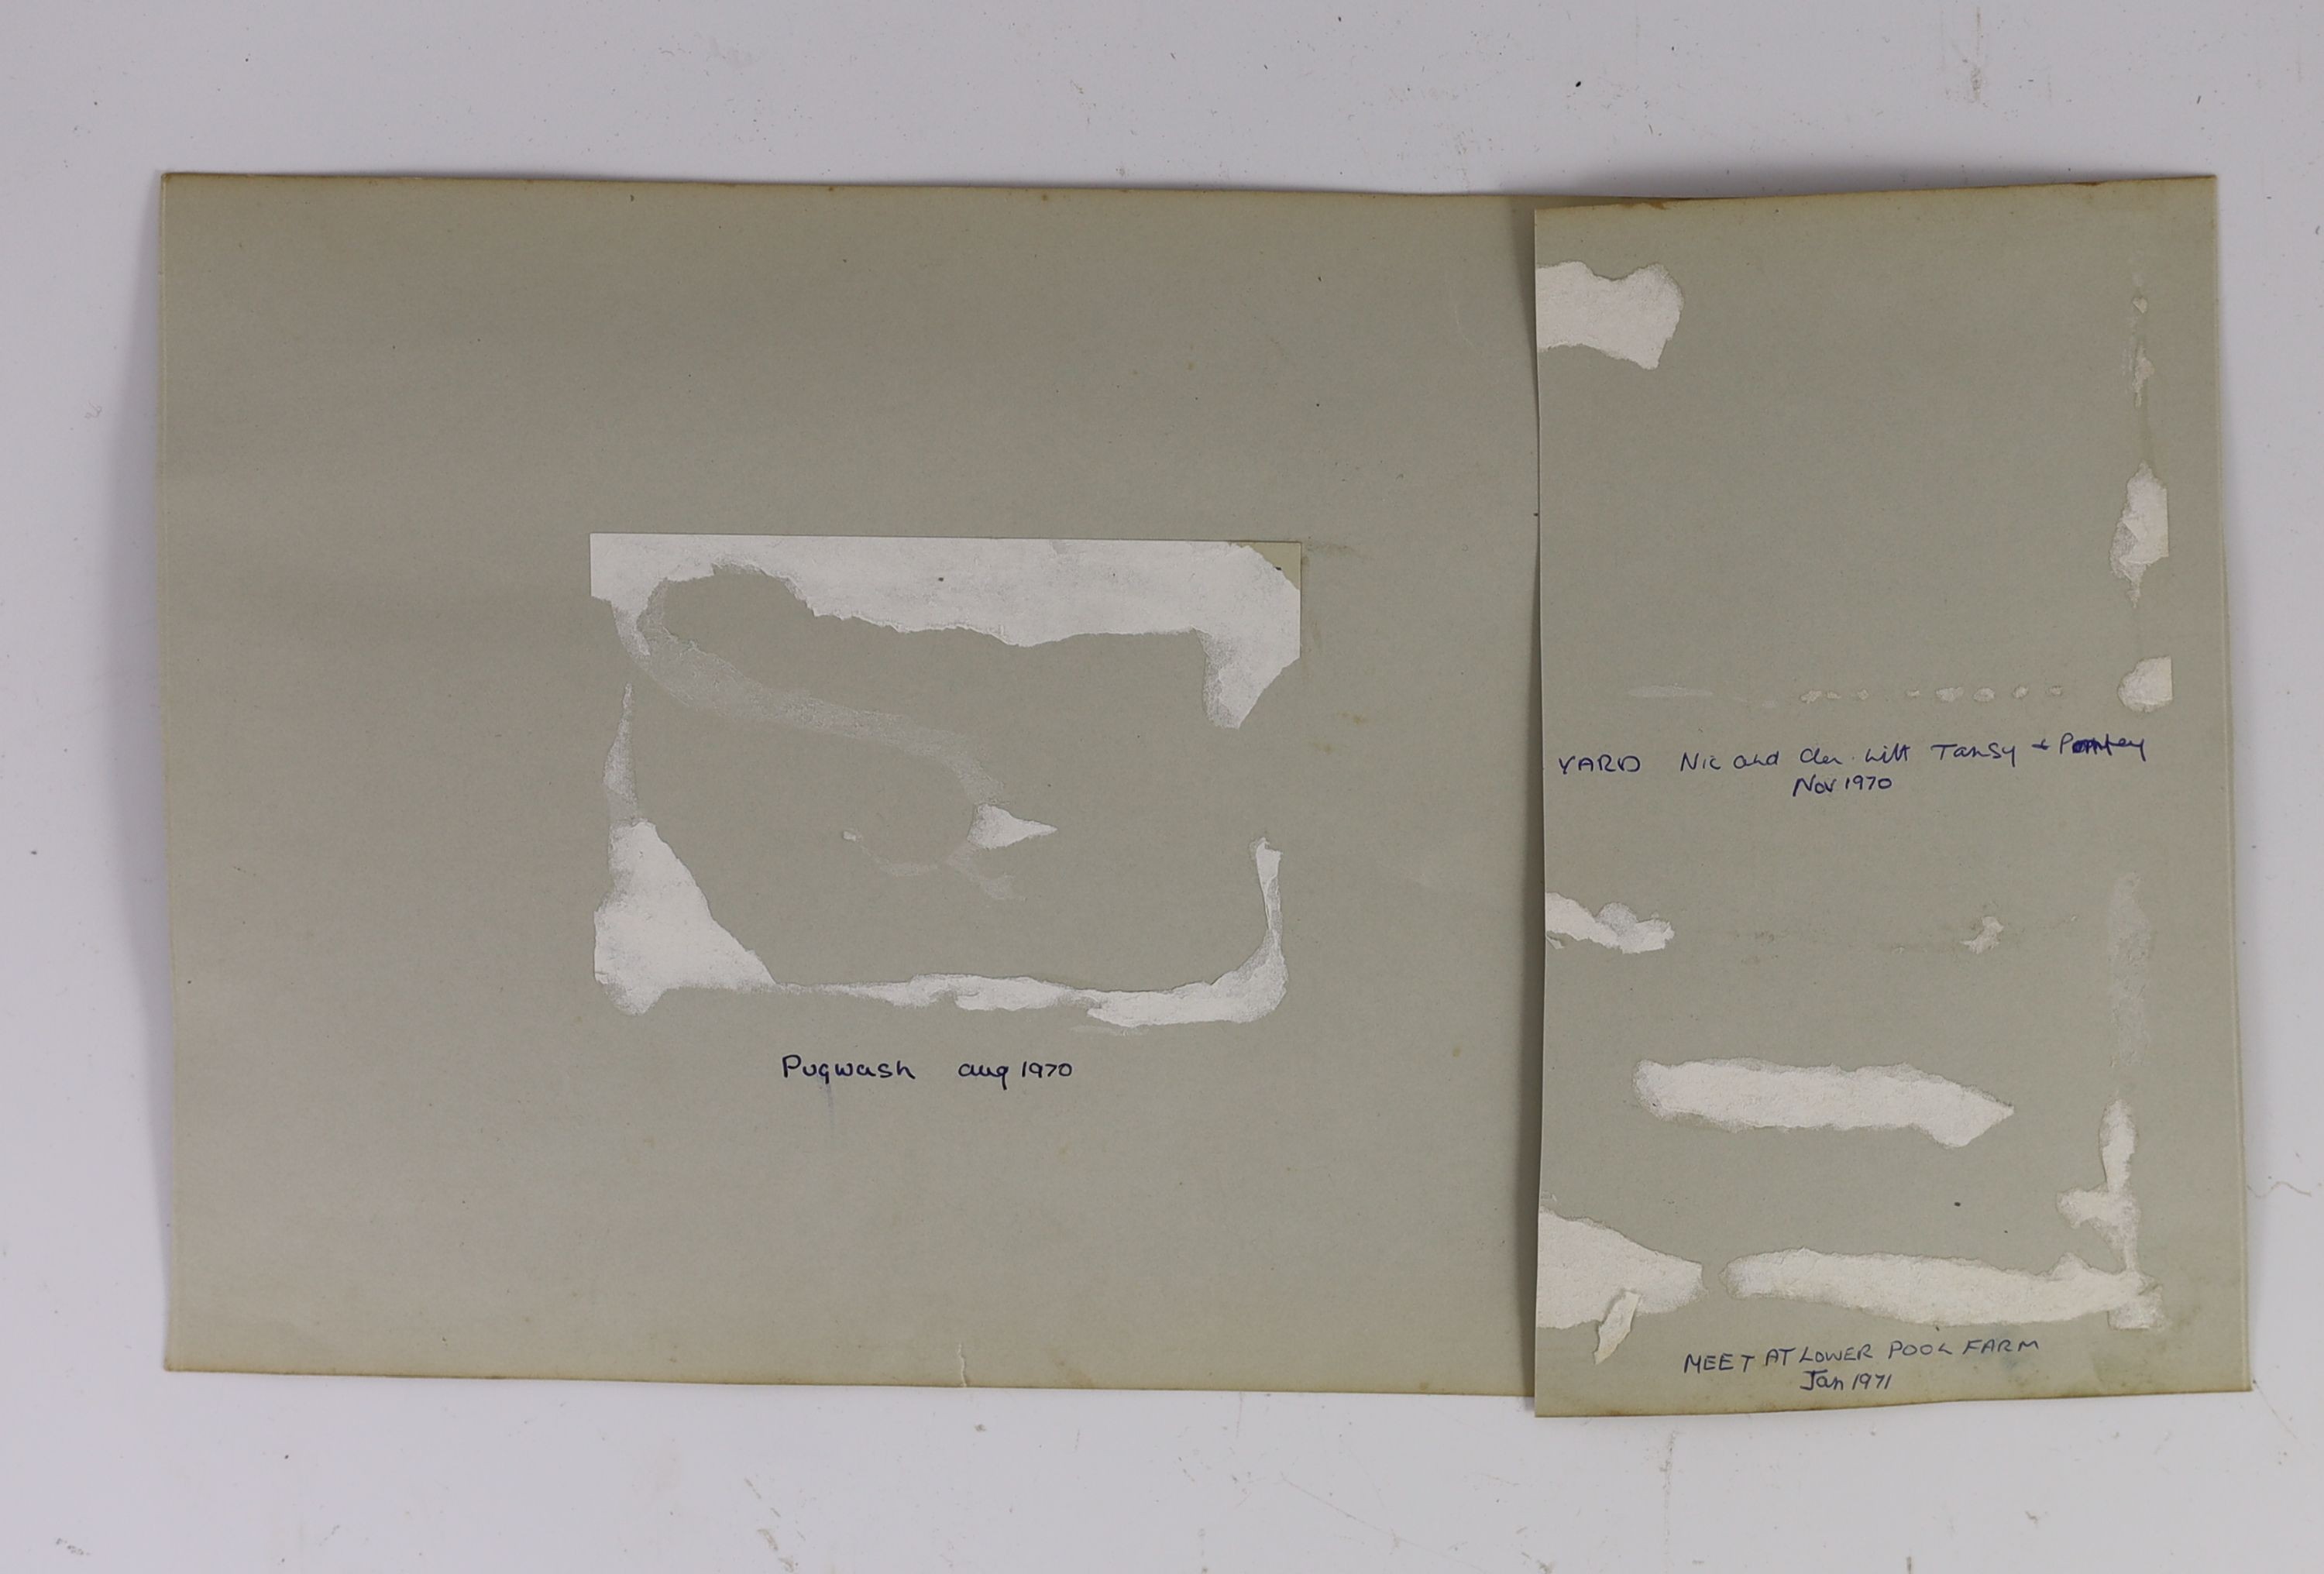 A group of three colour photographs, each photo aoorx. 12.5 x 9cm with margins